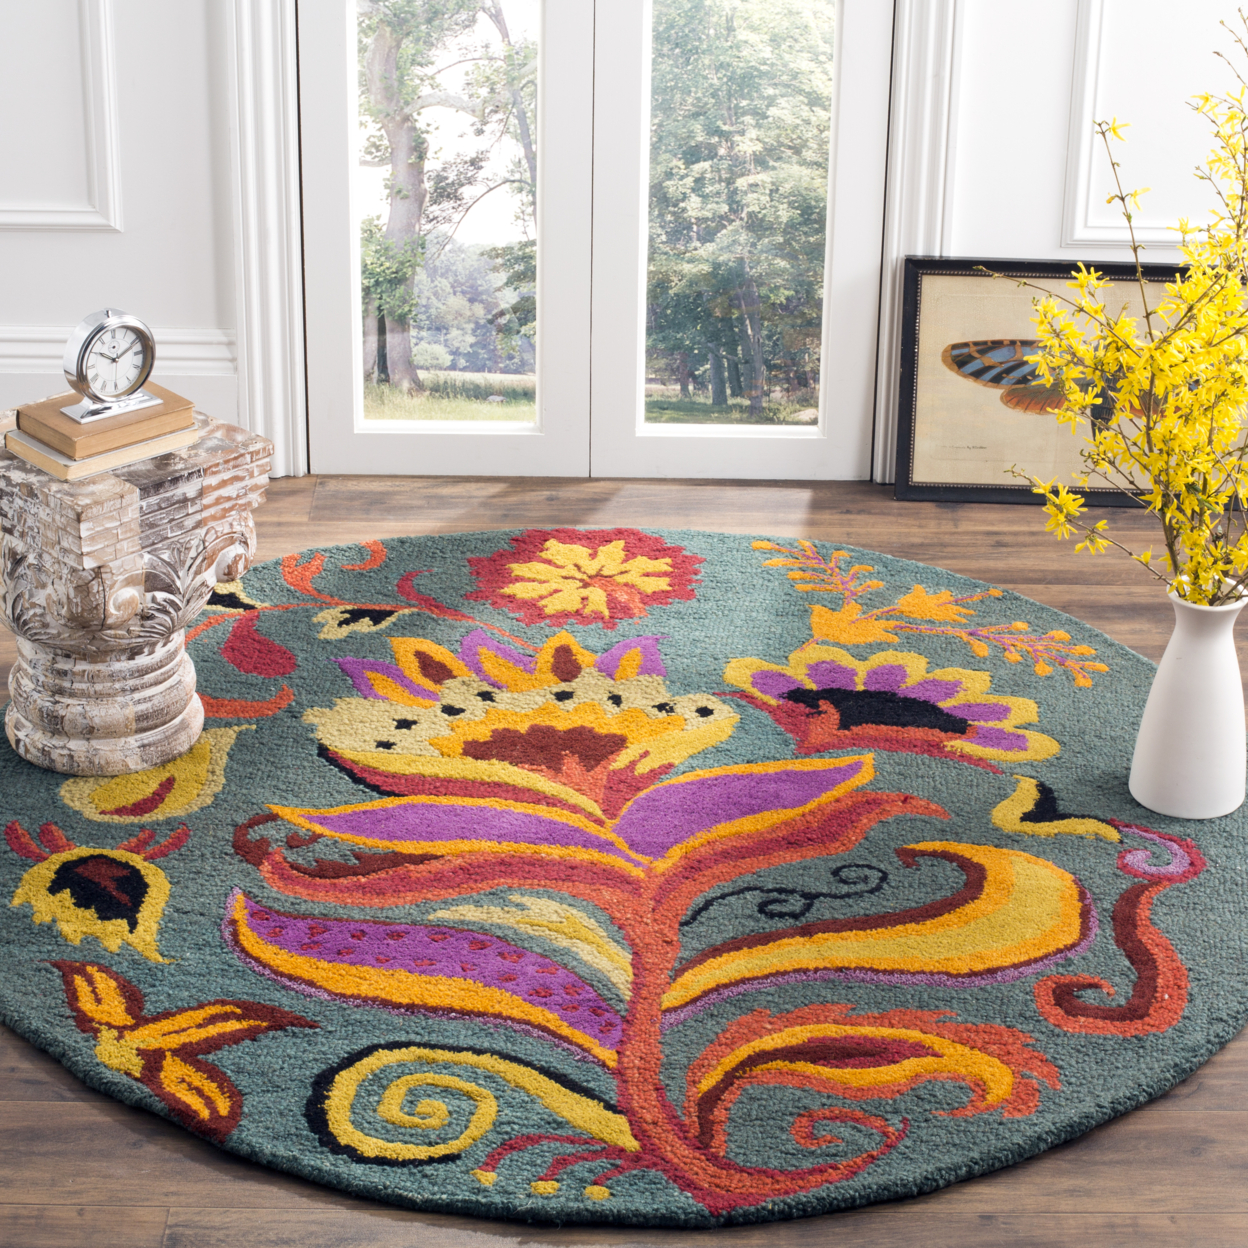 SAFAVIEH Blossom BLM679A Hand-hooked Blue / Multi Rug - 6' Square